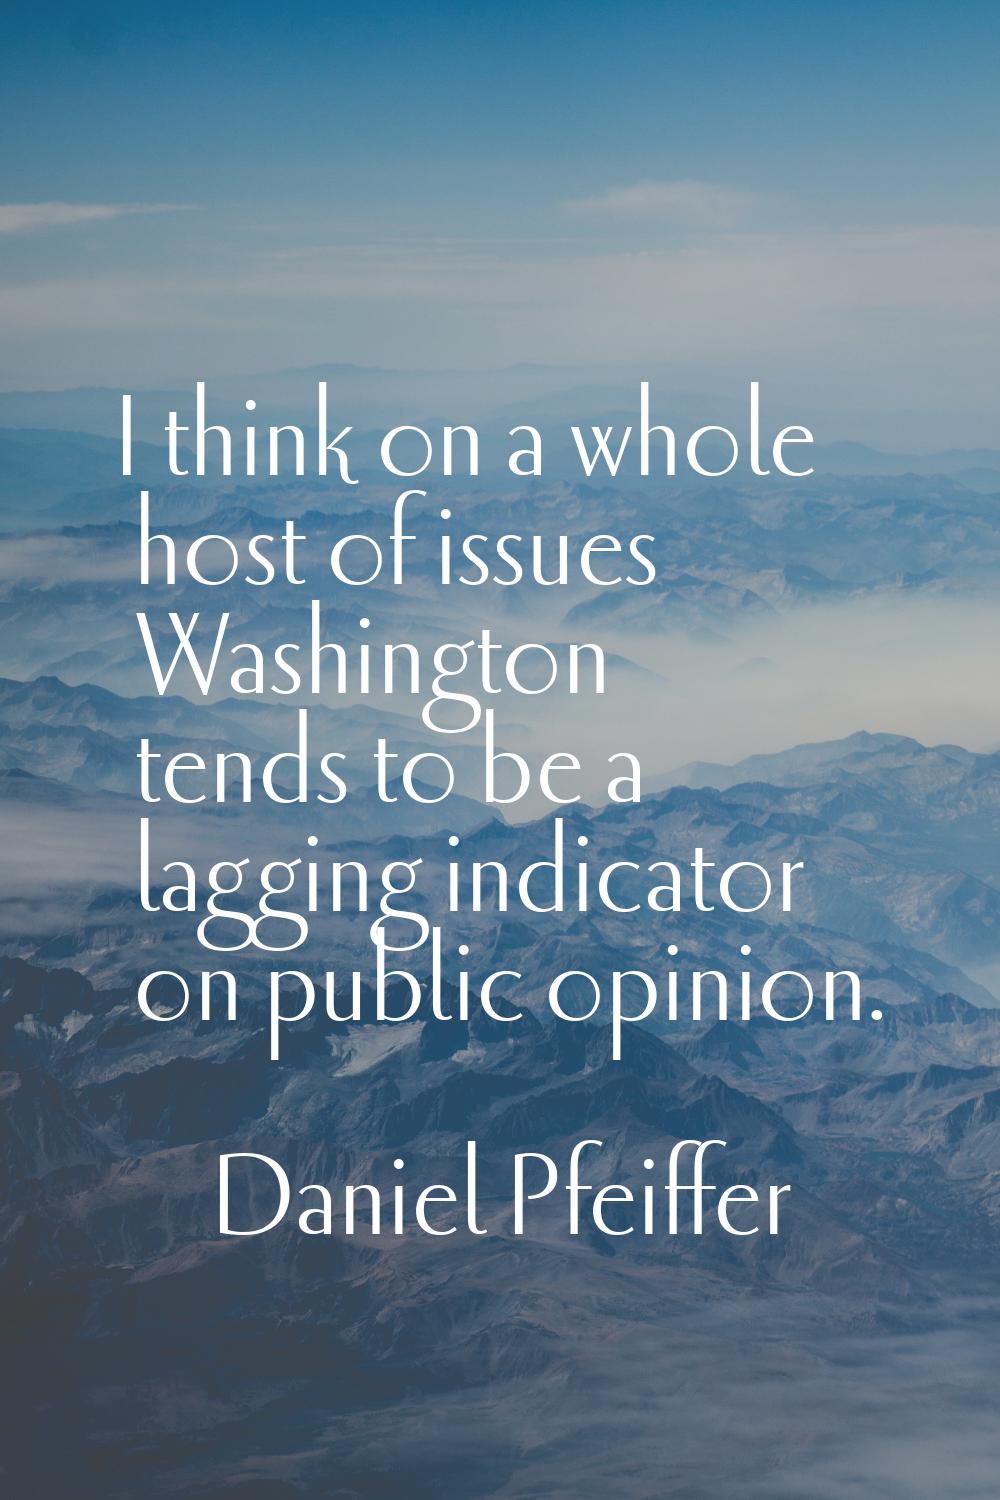 I think on a whole host of issues Washington tends to be a lagging indicator on public opinion.